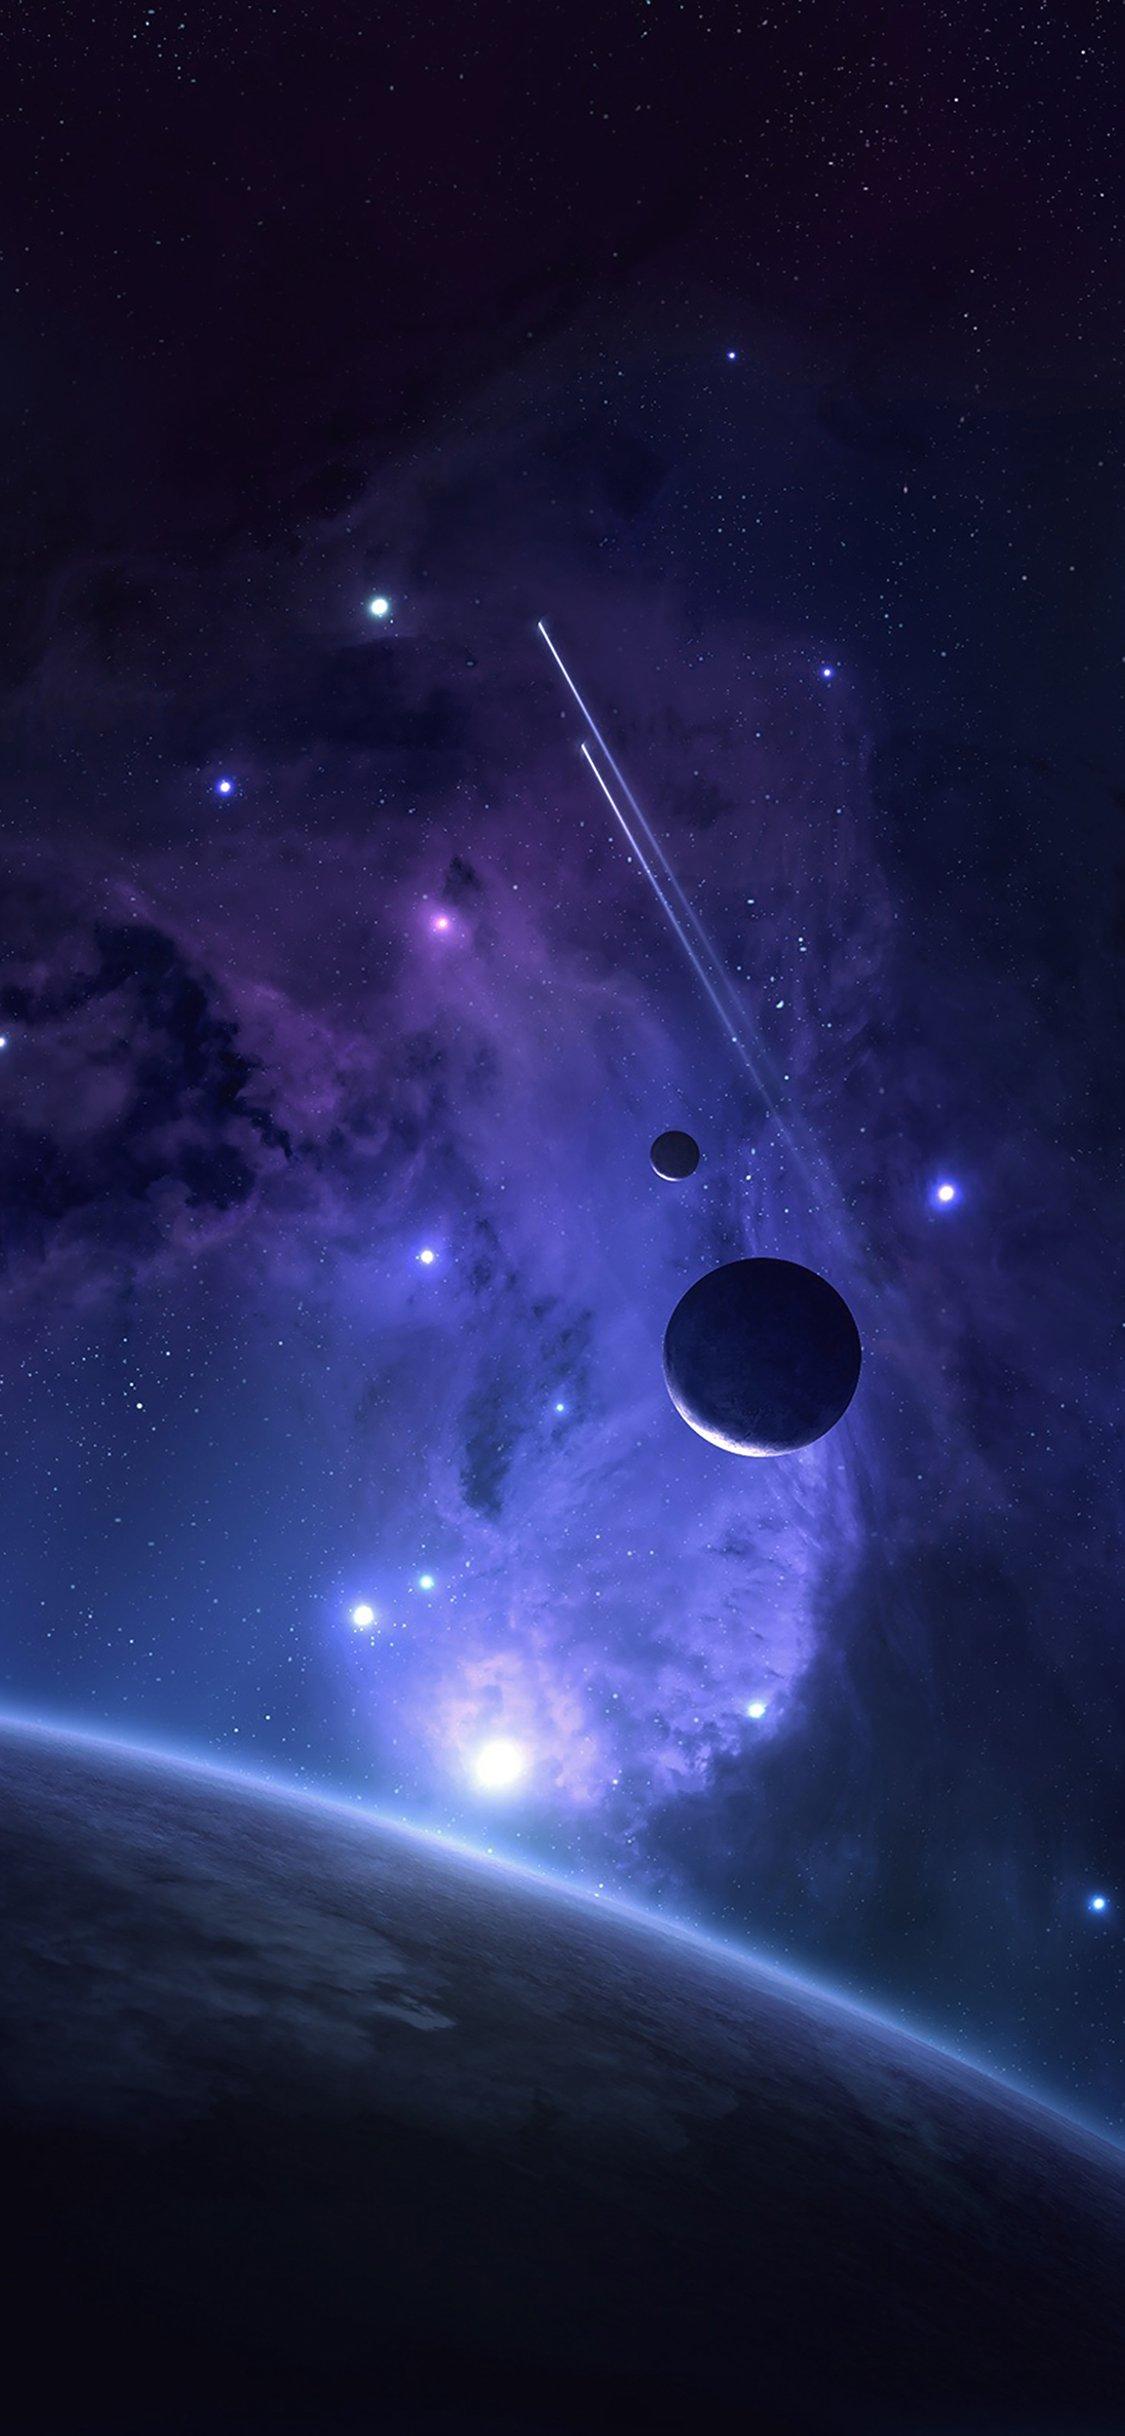 iPhone wallpaper. planets space abstract